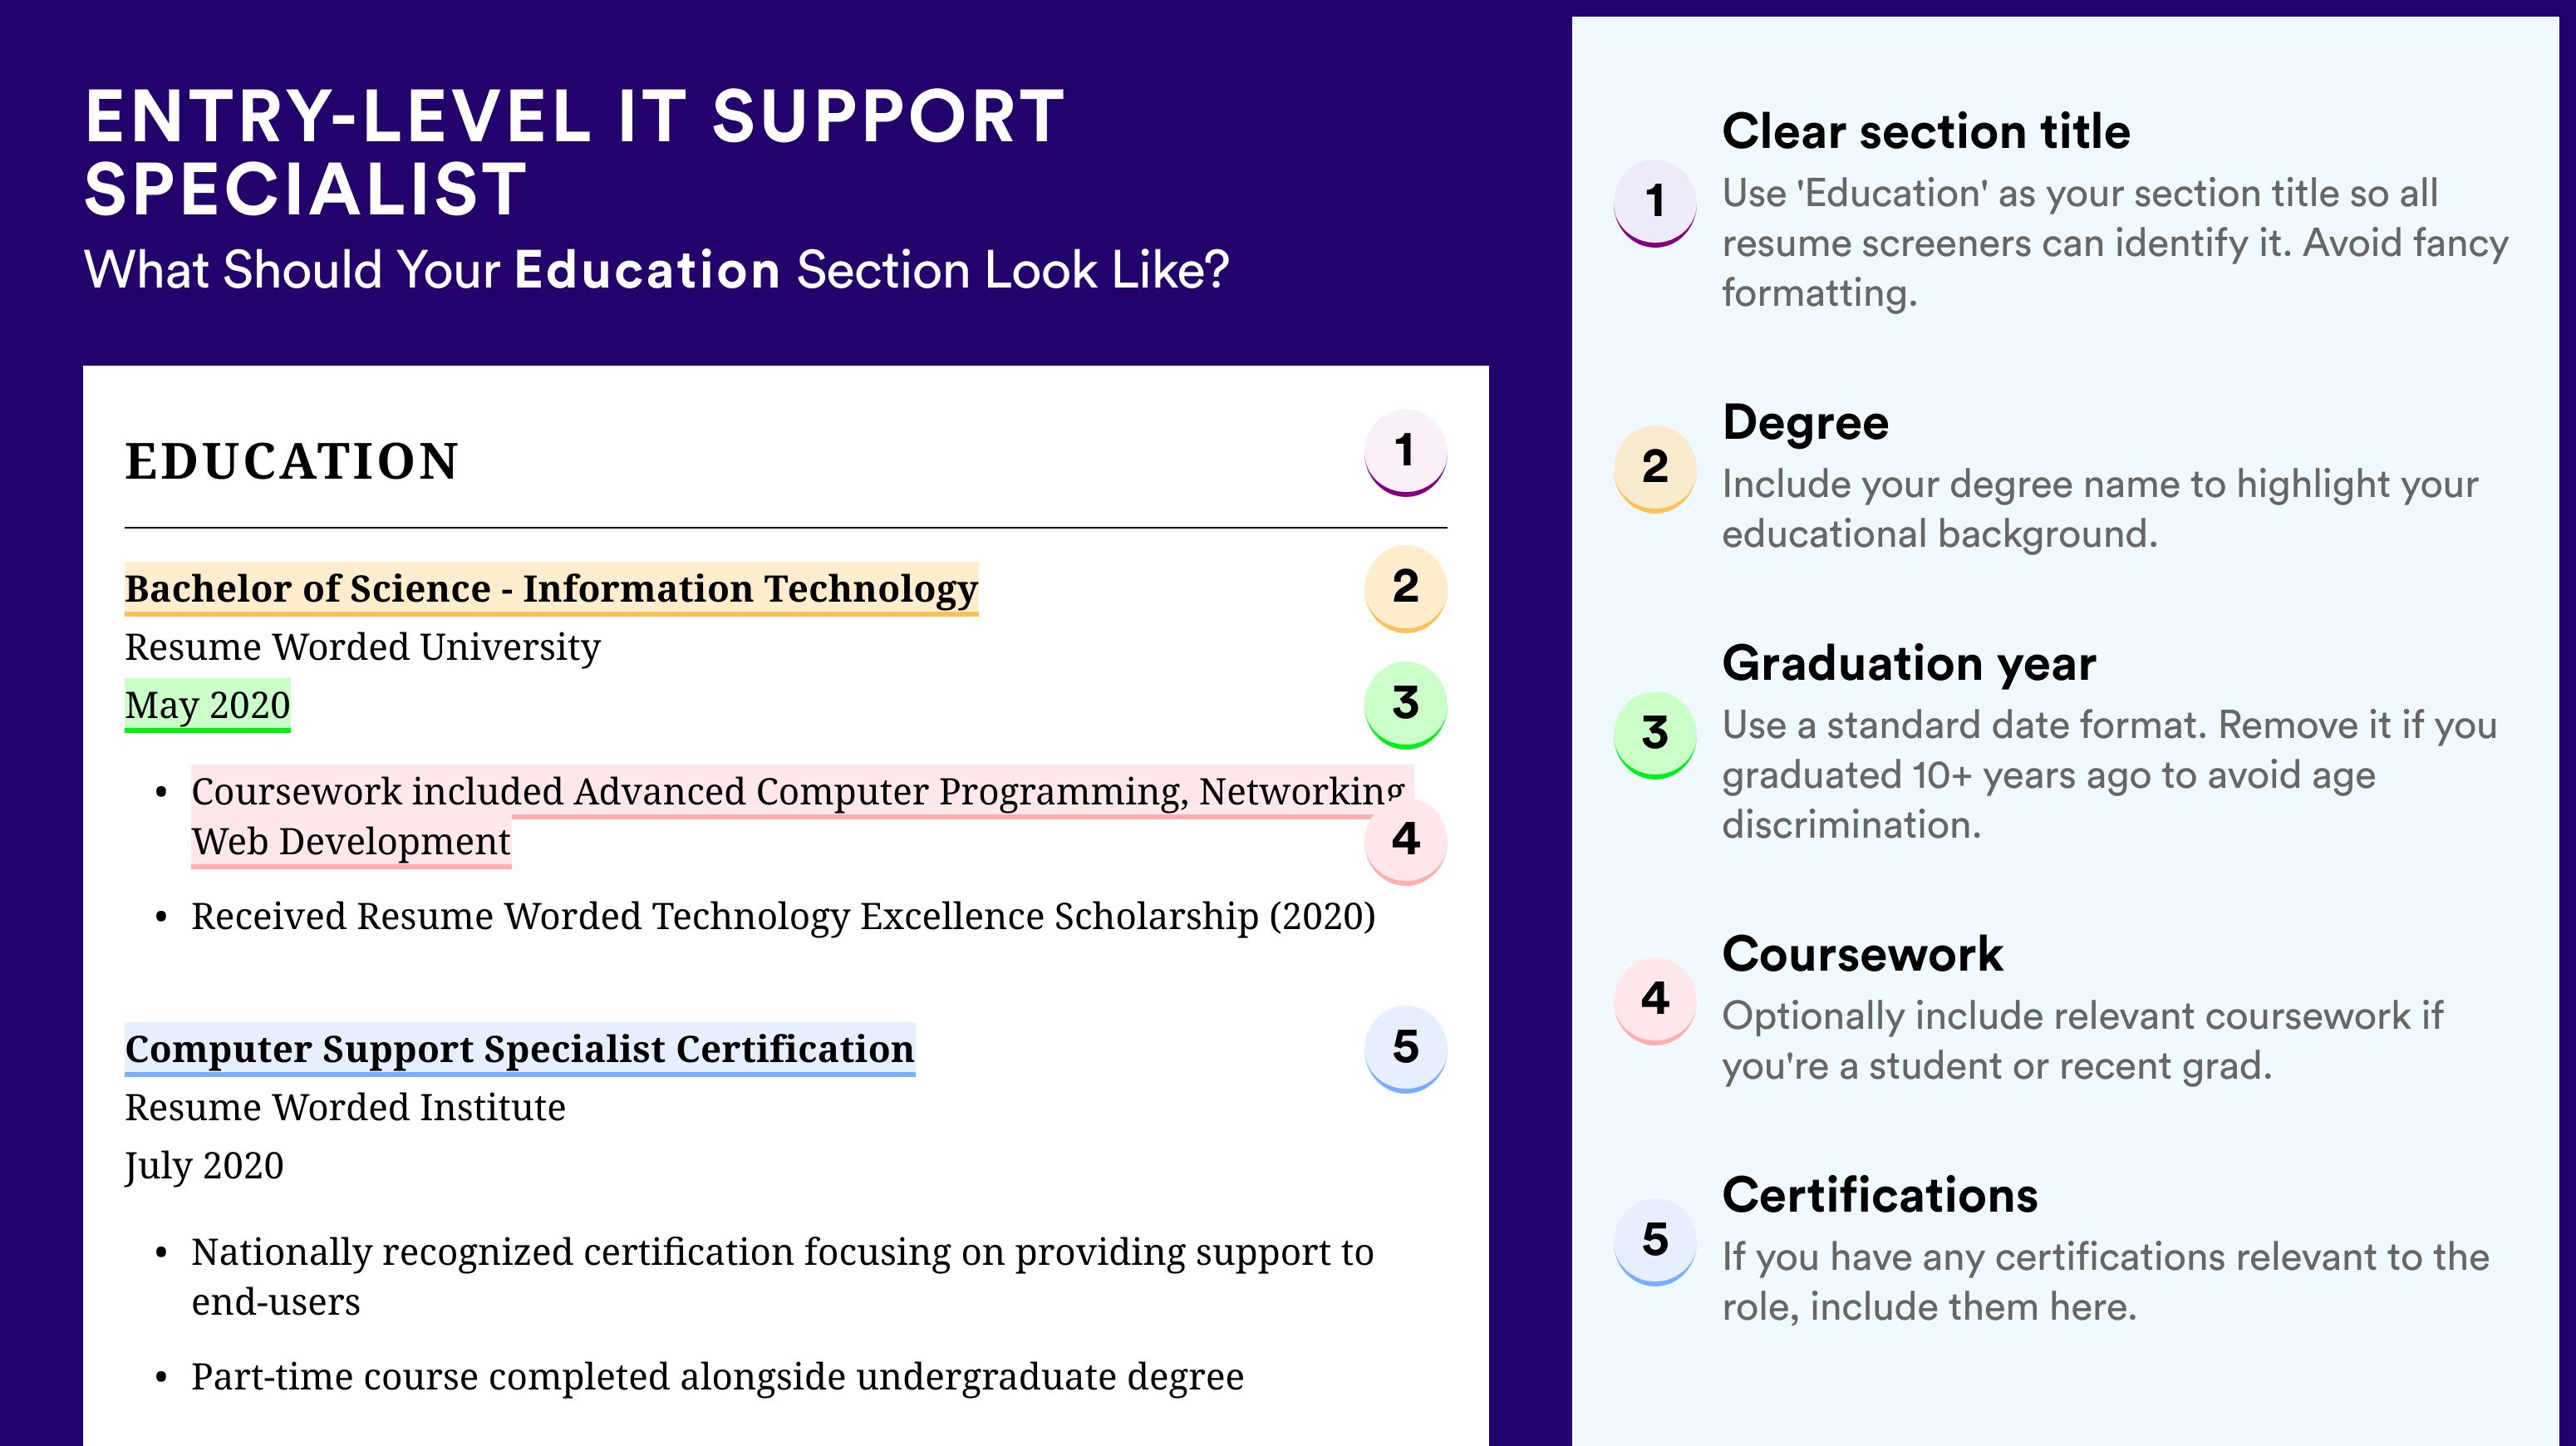 How To Write An Education Section - Entry-Level IT Support Specialist Roles